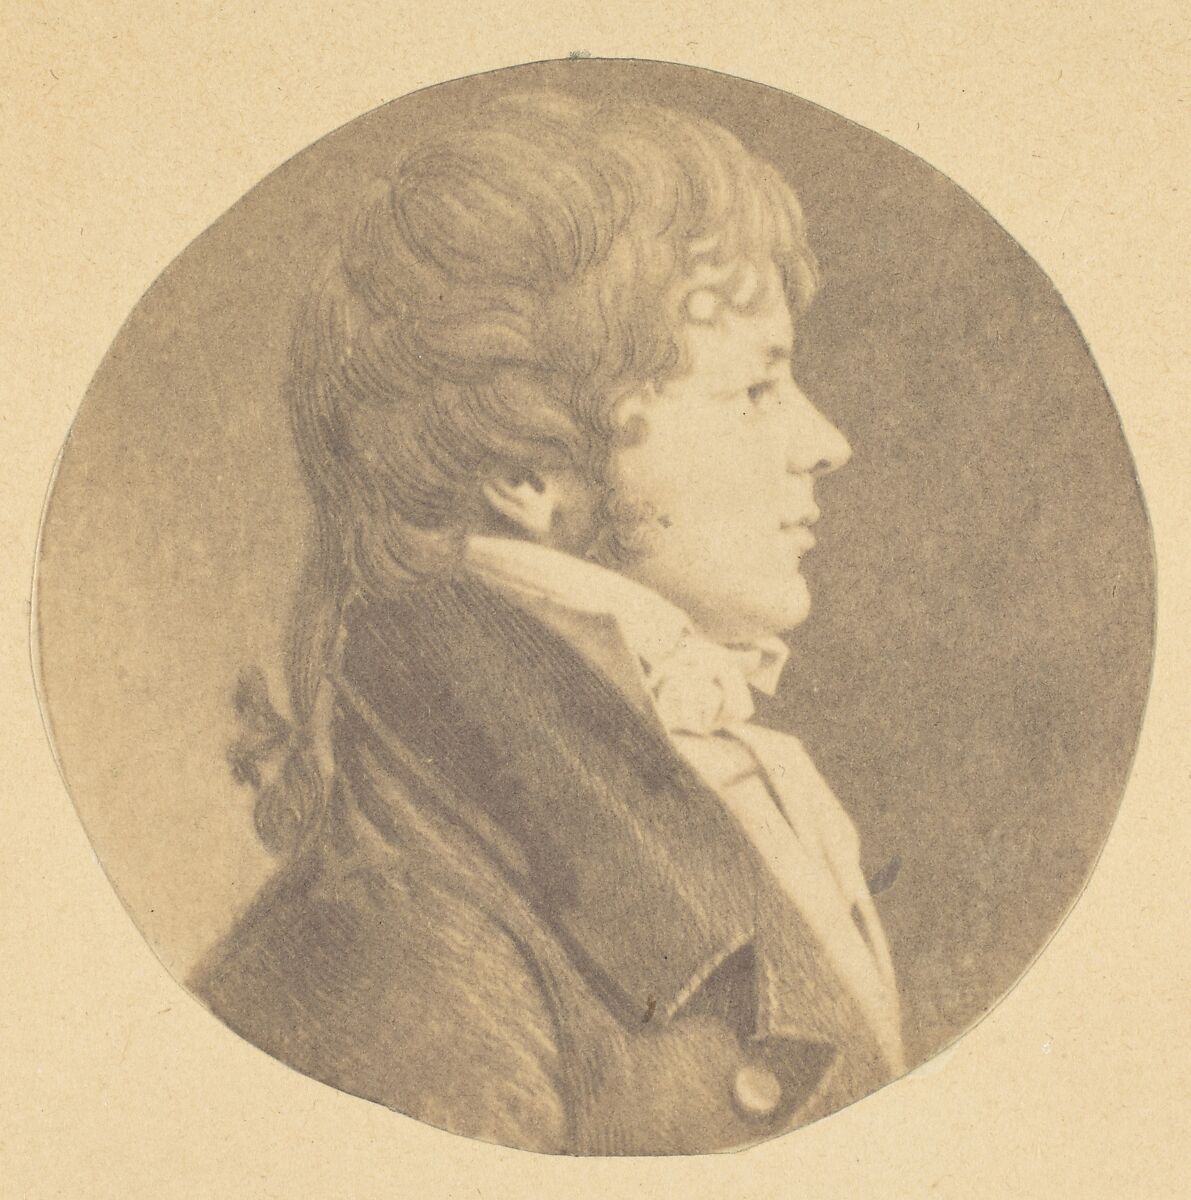 [Mezzotint portrait of a Young Man in Profile, from The St. Memin Collection of Portraits], Jeremiah Gurney (American, 1812–1895 Coxsackie, New York), Salted paper print 